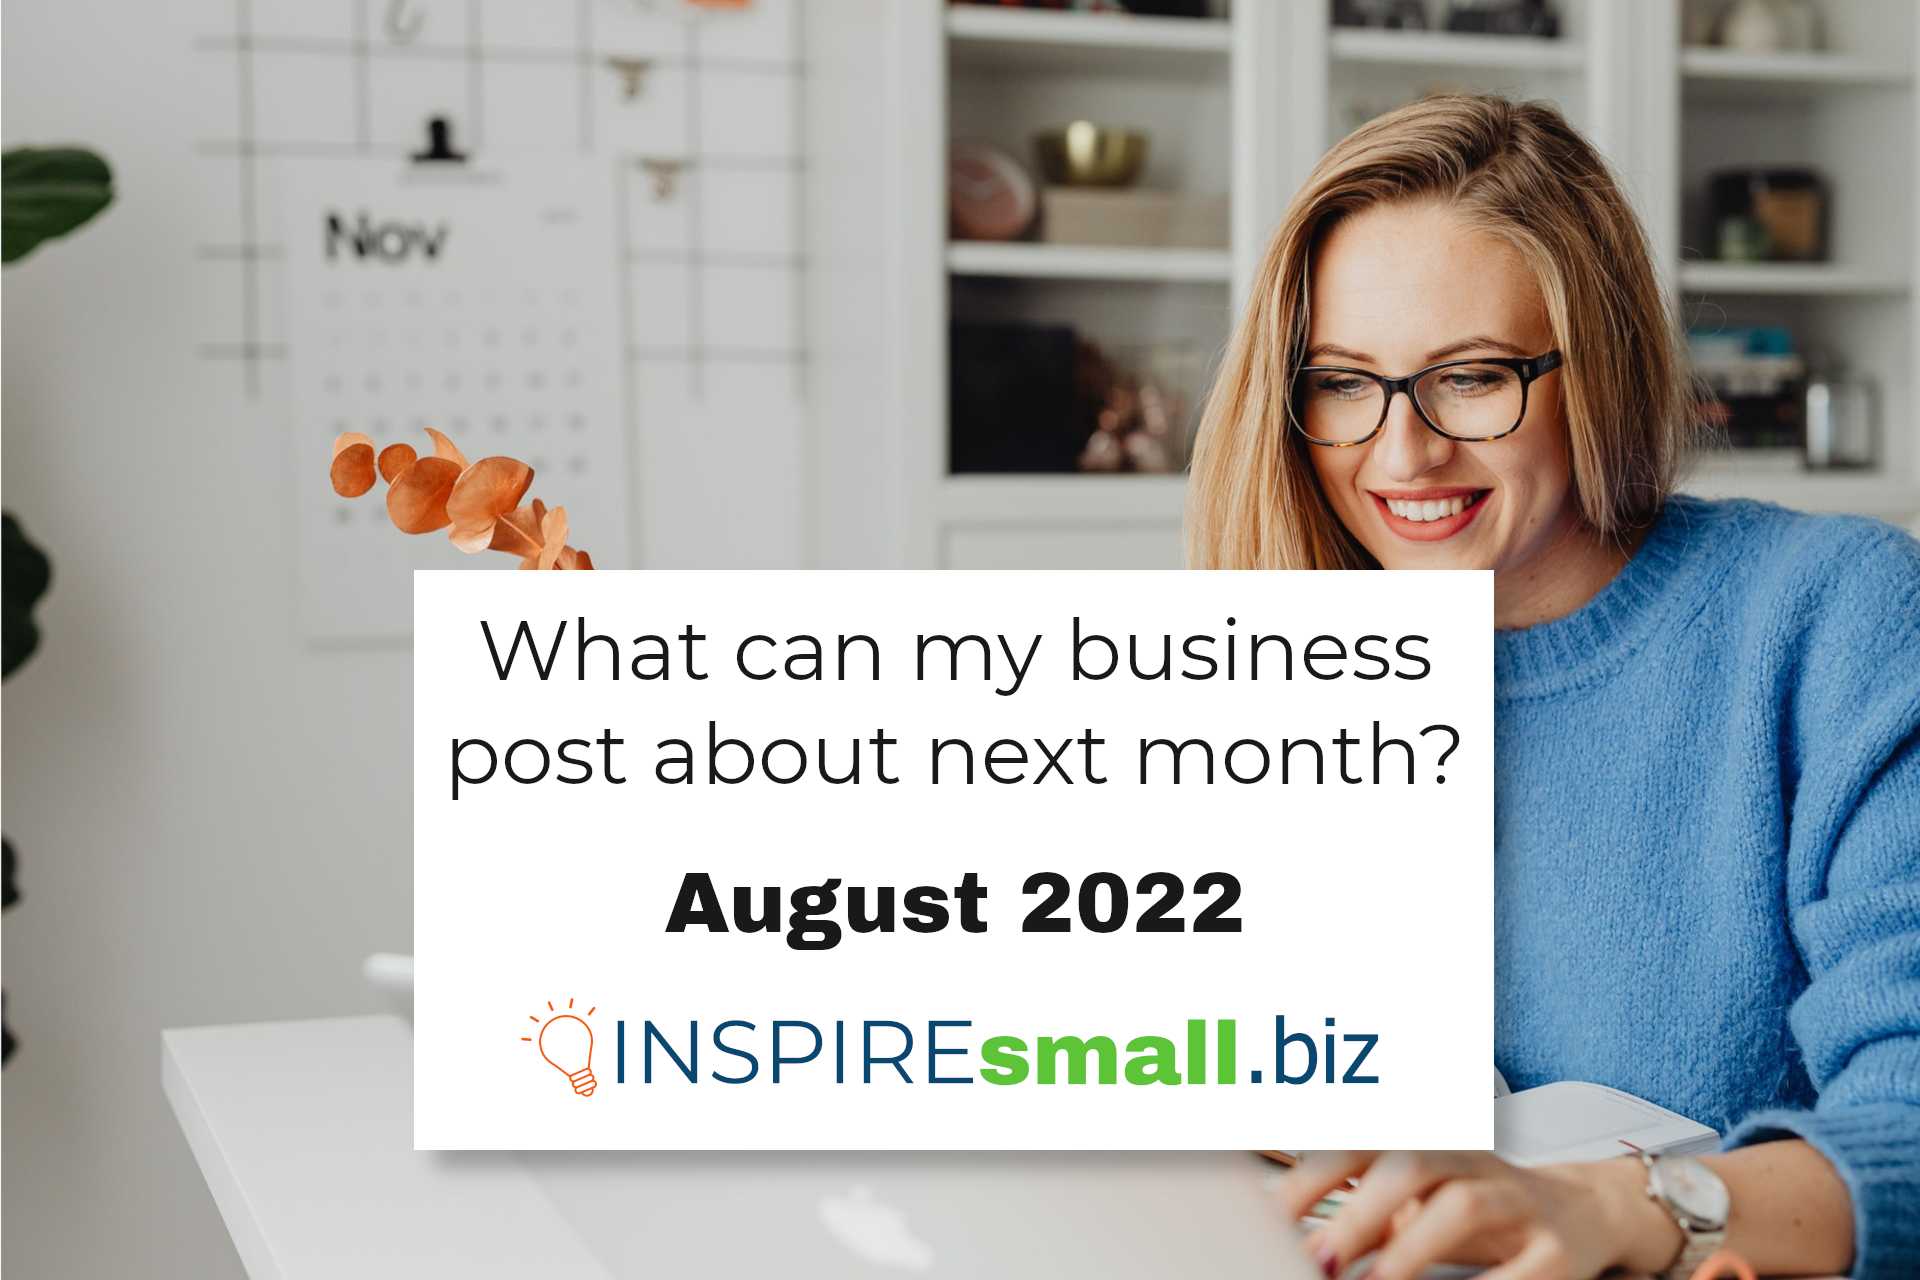 A person in a blue shirt smiling at a computer behind the text, What can my business post about next month? August 2022, from INSPIREsmall.biz